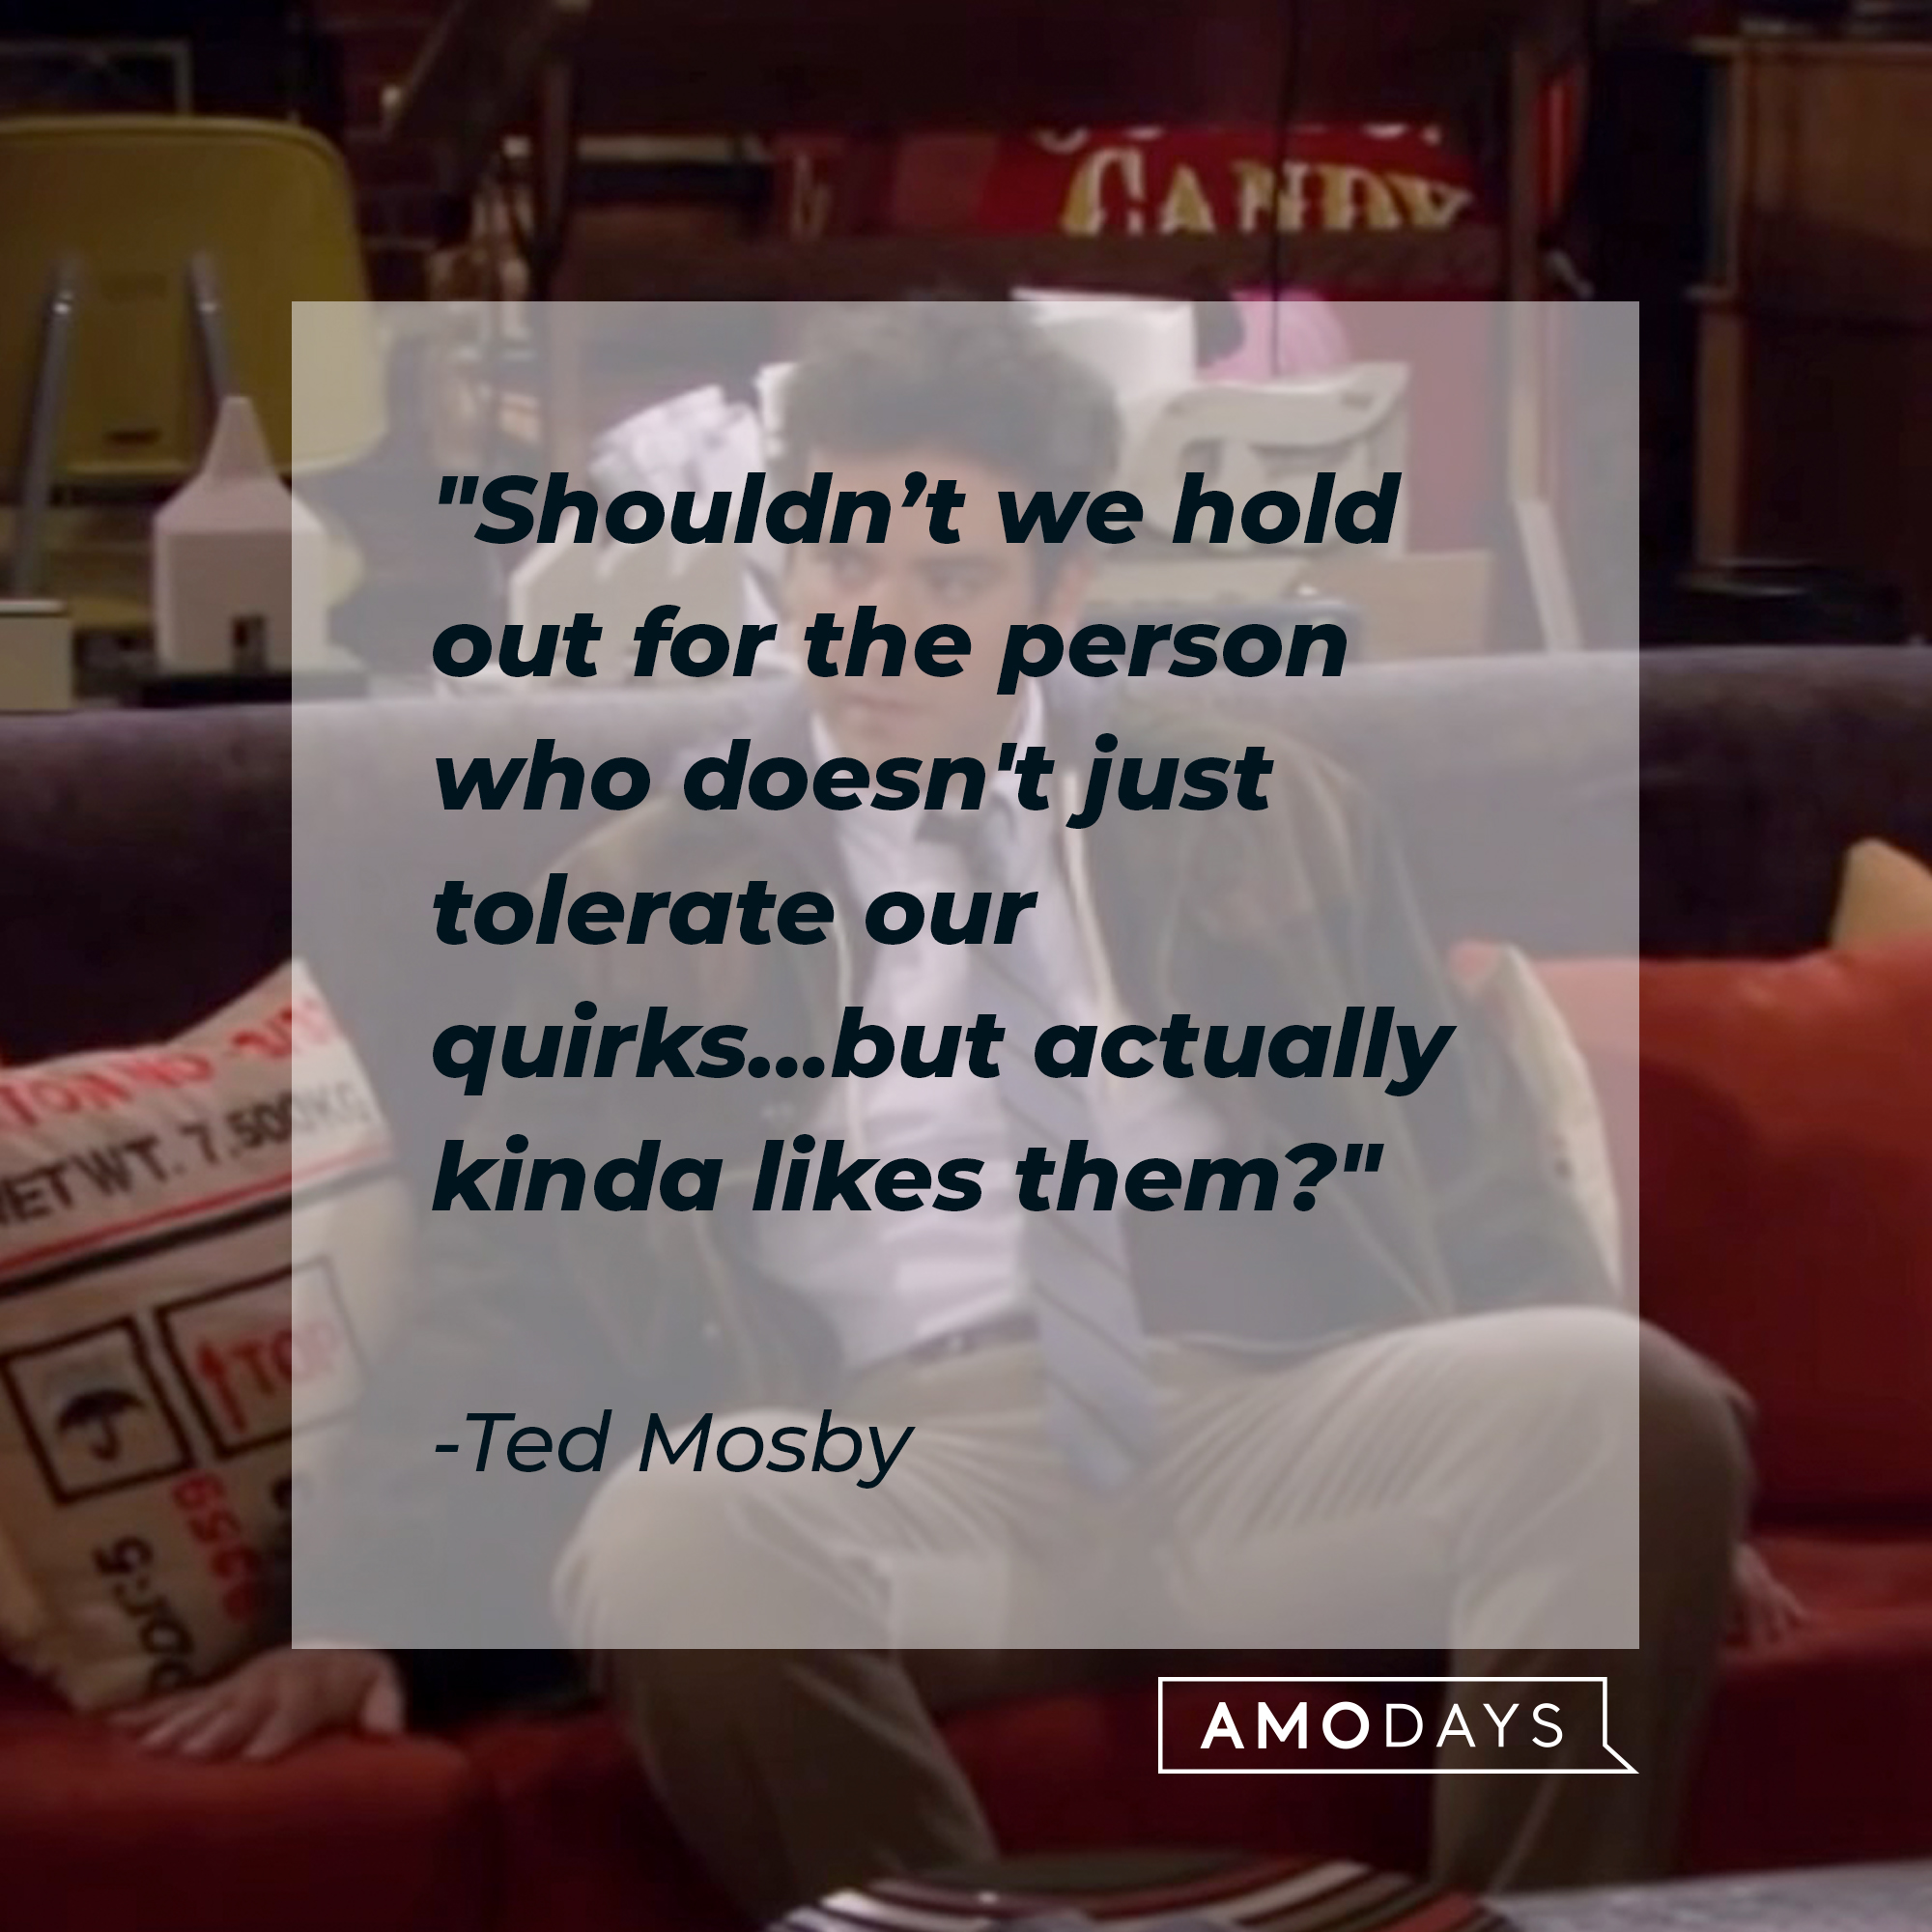 An image of Ted Mosby with his quote: "Shouldn’t we hold out for the person who doesn't just tolerate our quirks…but actually kinda likes them?" | Source: facebook.com/OfficialHowIMetYourMother